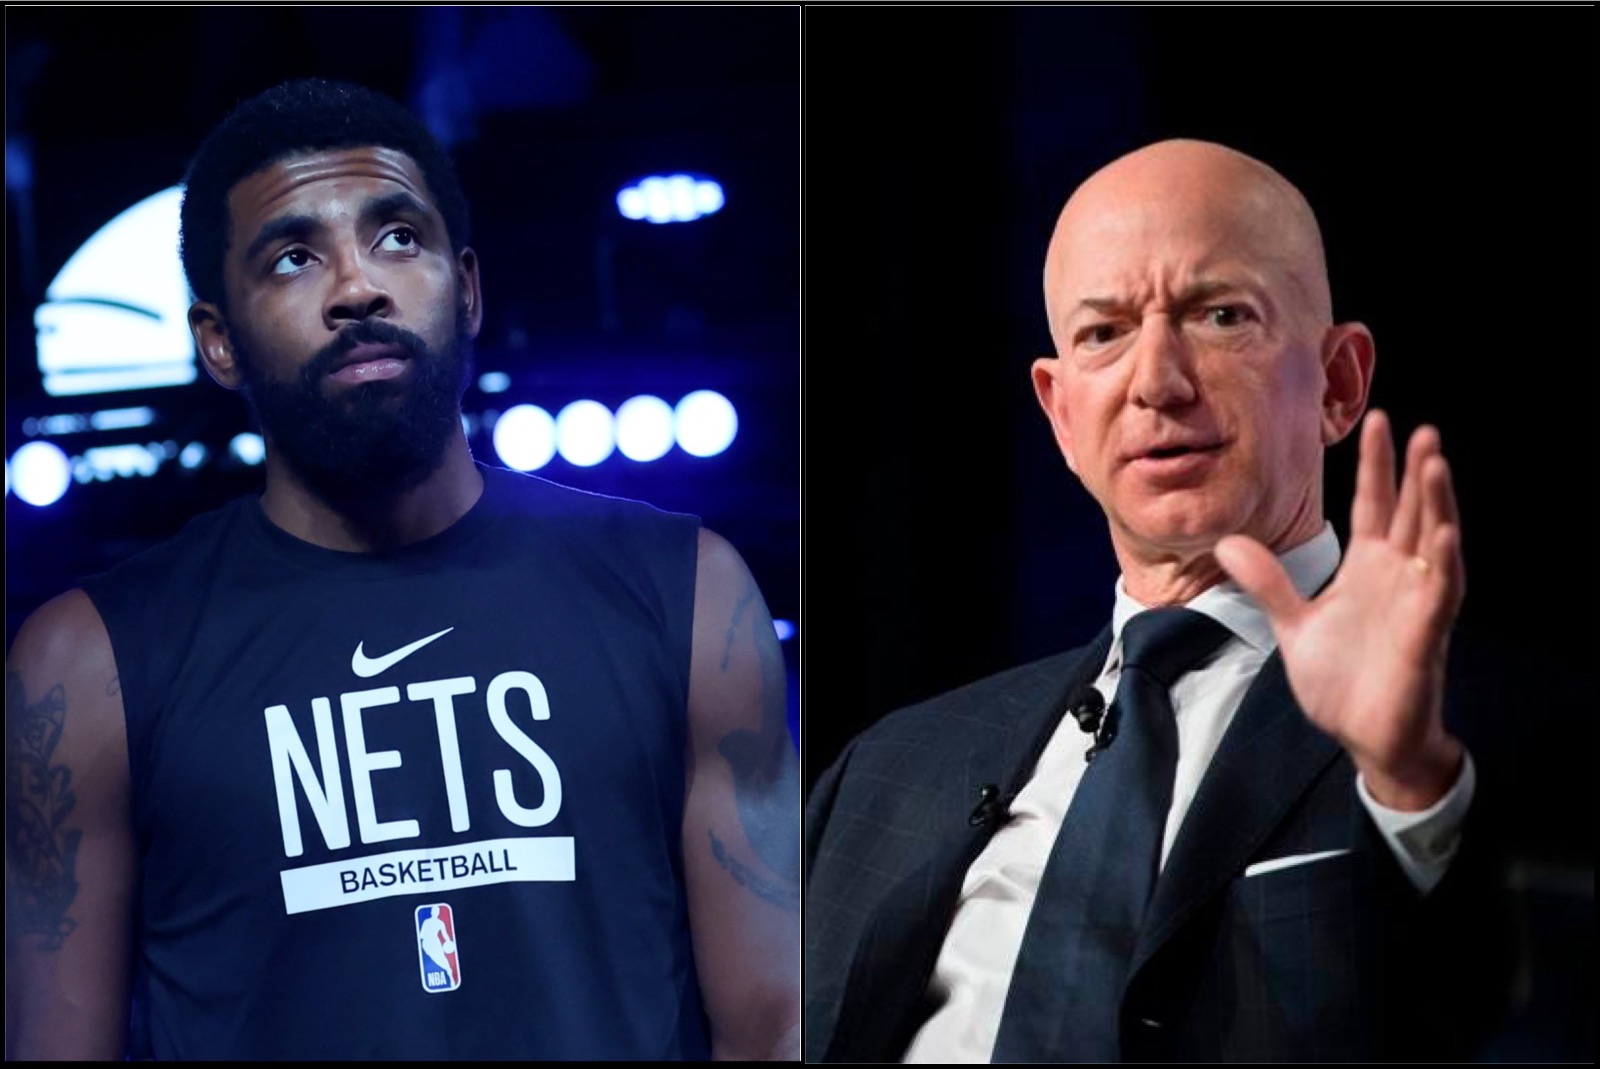 Nets and ADL Want Jeff Bezos and Amazon To Remove The Film Kyrie Irving Shared on His Social Media